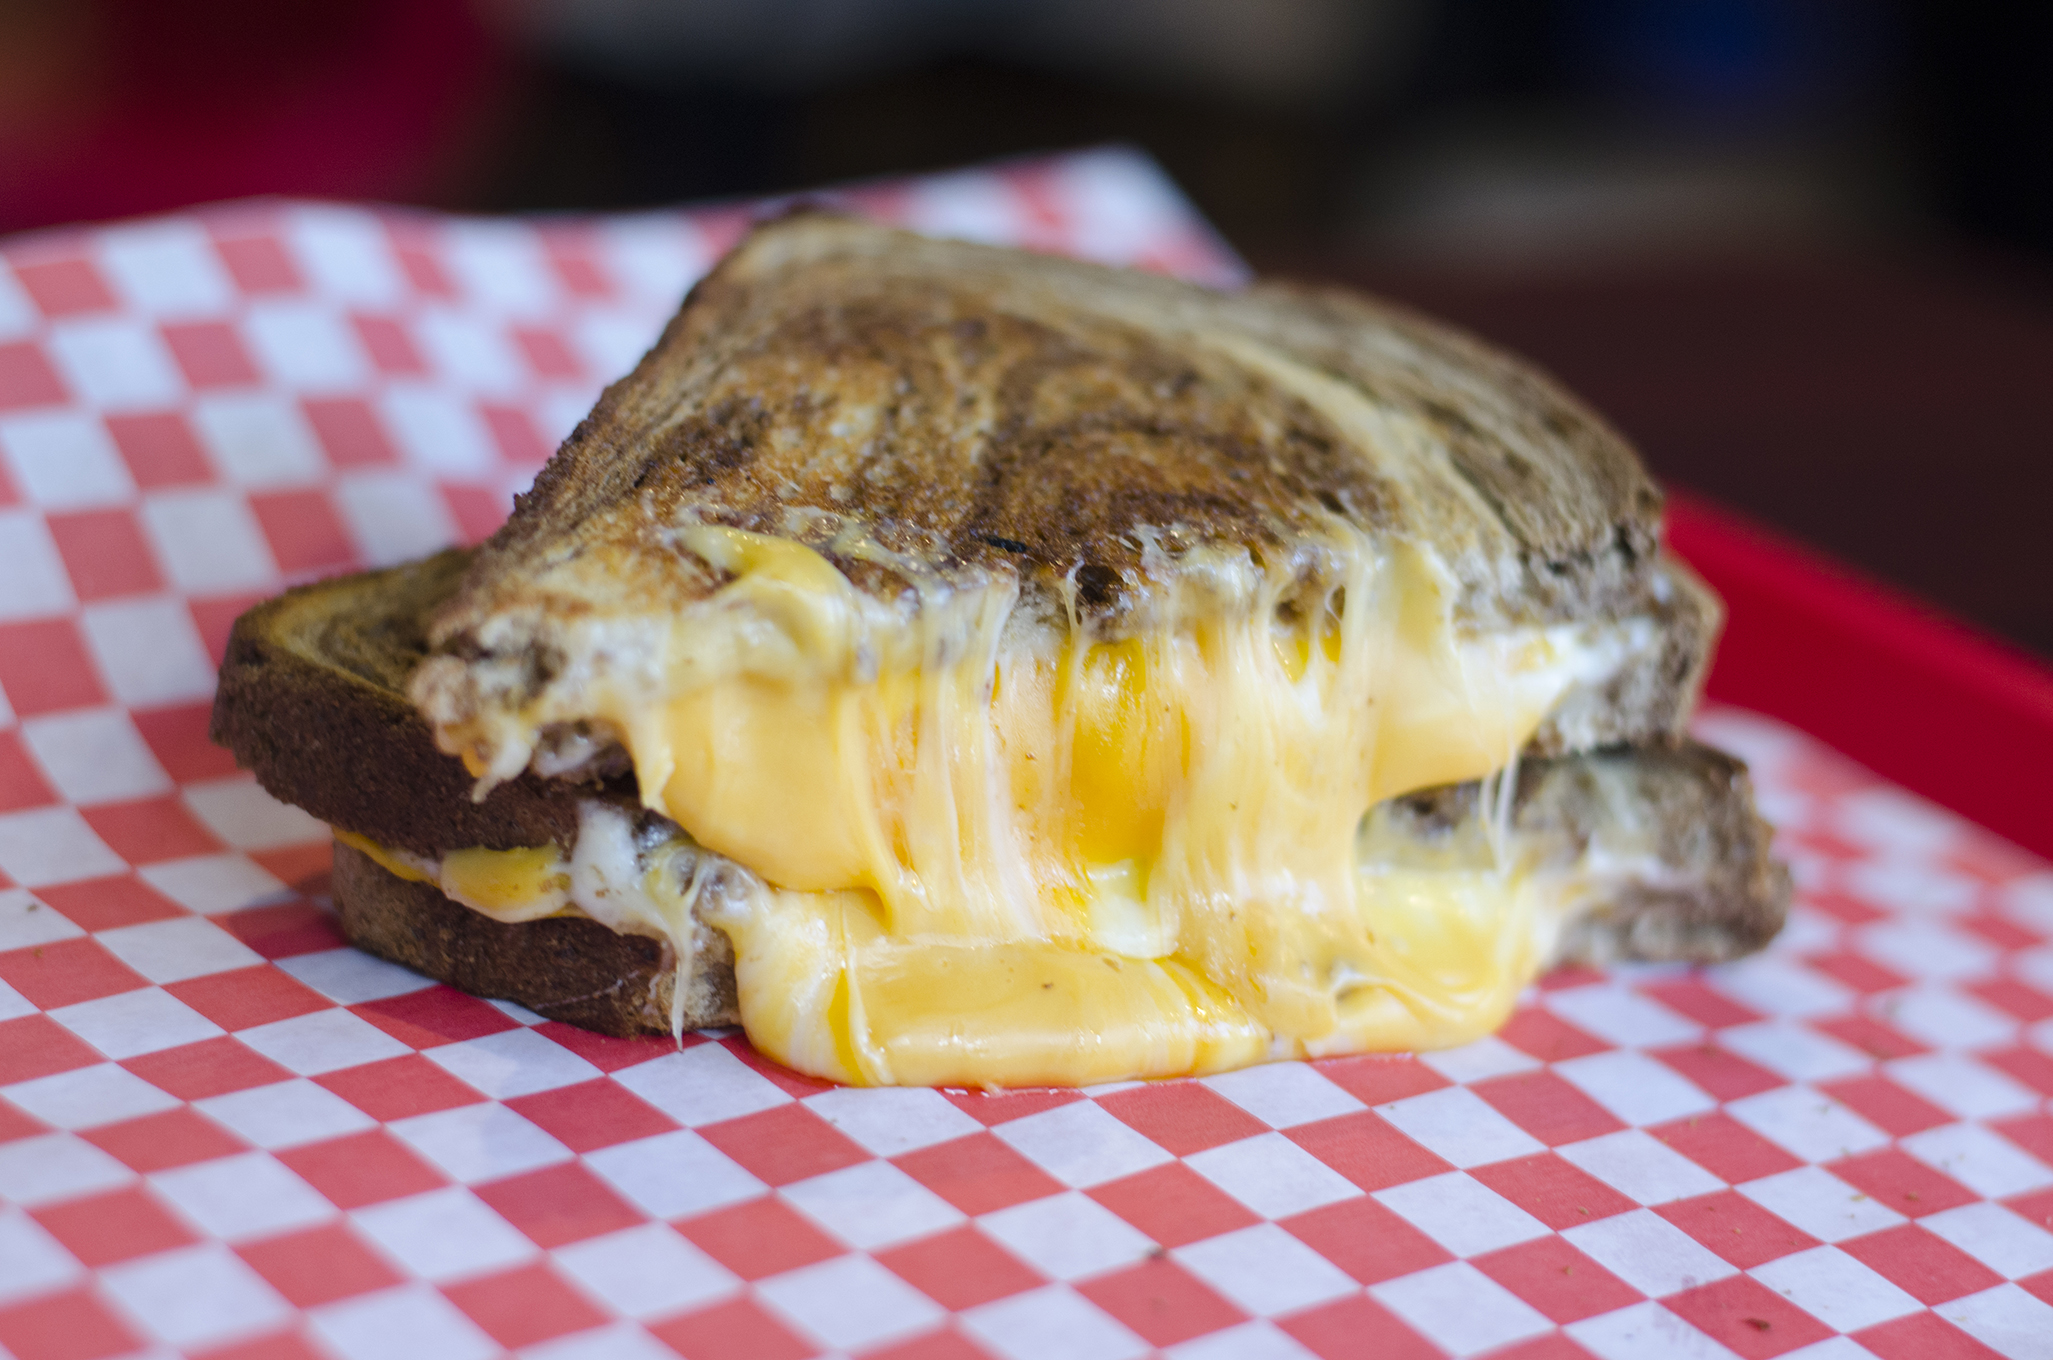 The original grilled cheese sandwich from Toasty's in Windsor, Ontario.